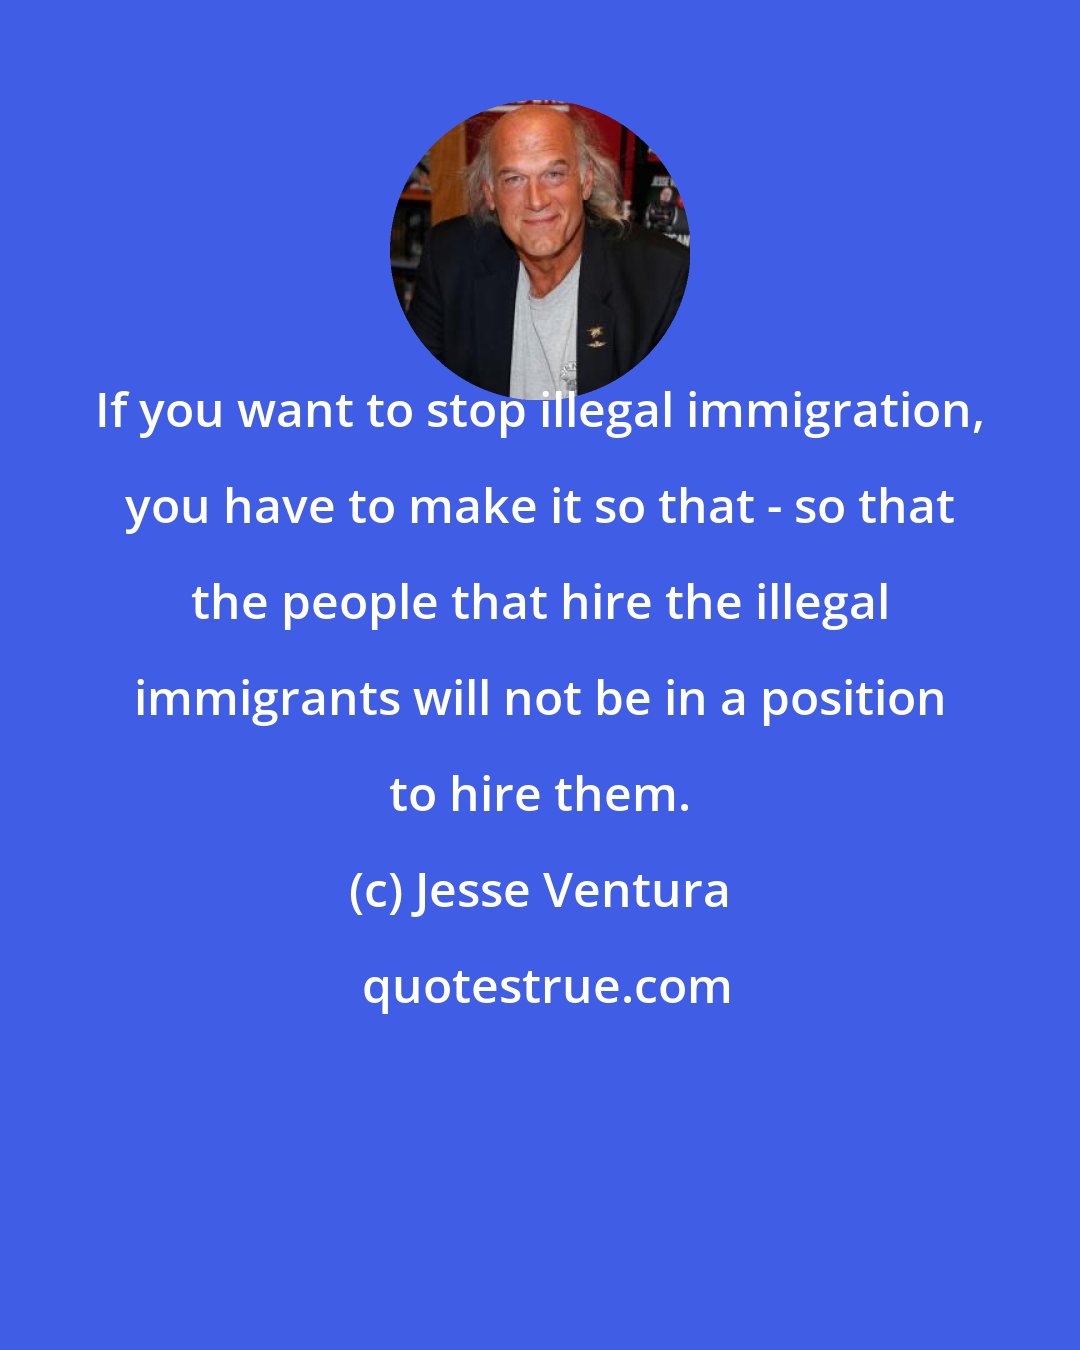 Jesse Ventura: If you want to stop illegal immigration, you have to make it so that - so that the people that hire the illegal immigrants will not be in a position to hire them.